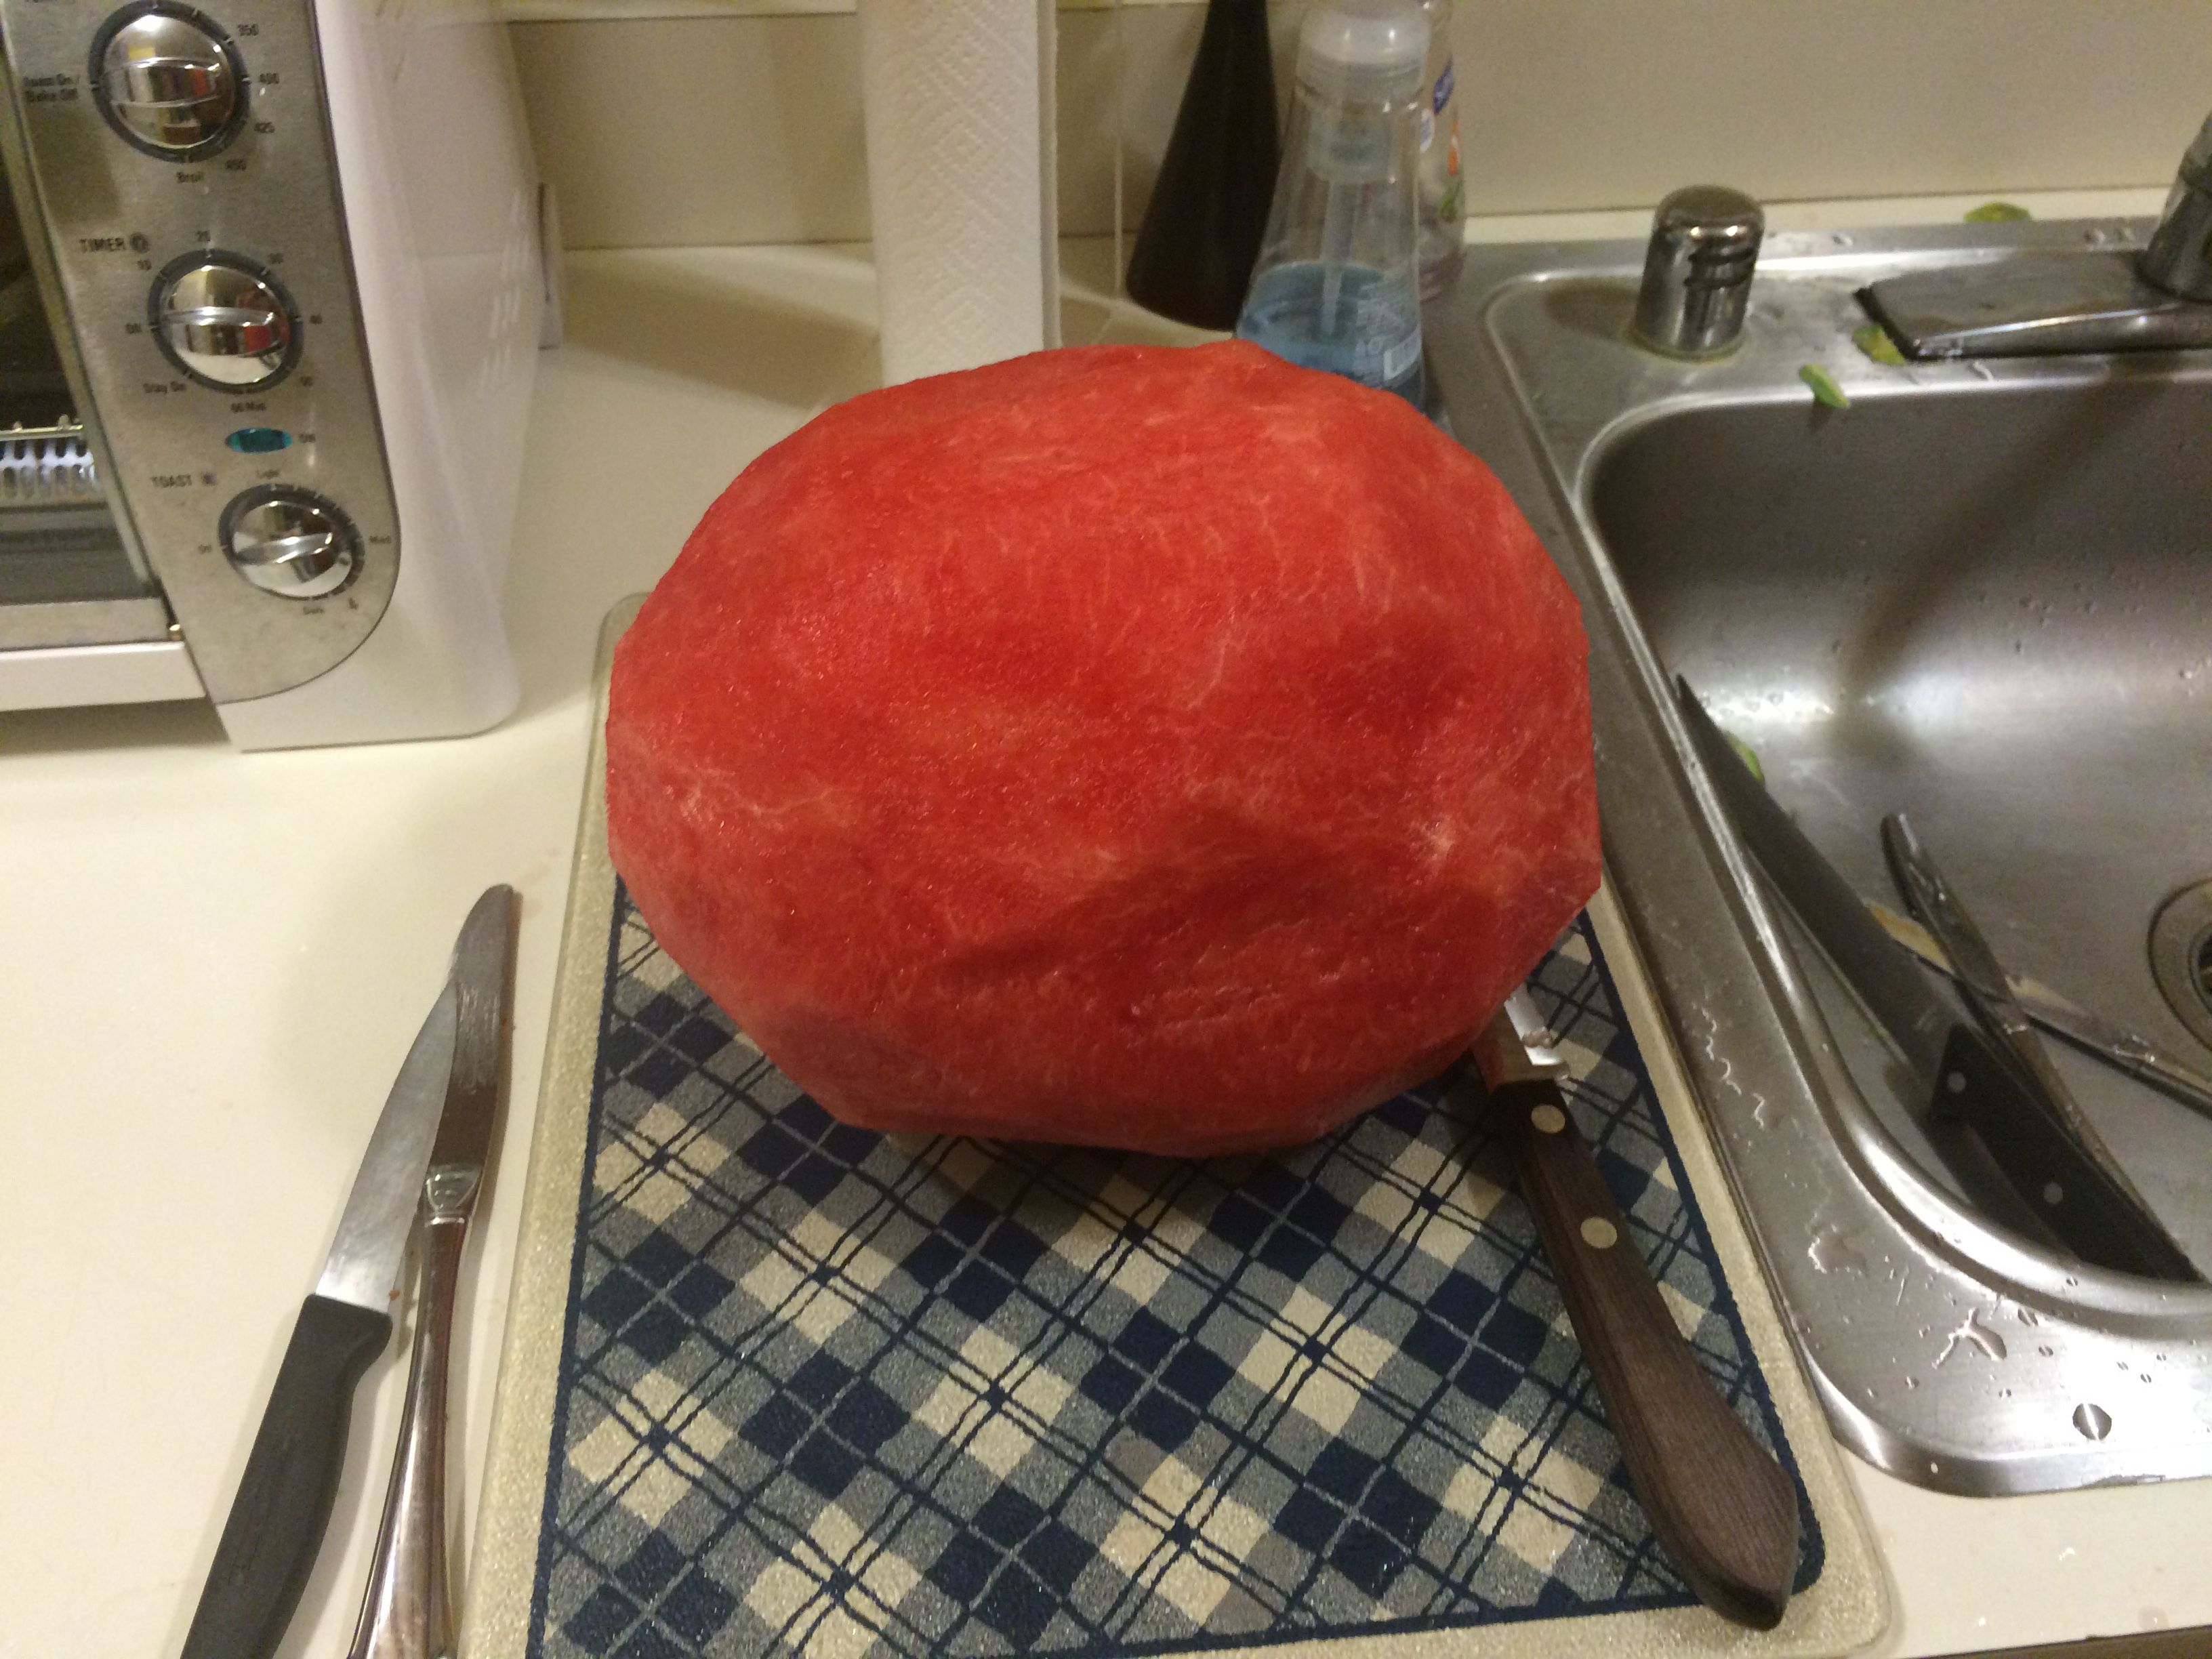 This uncomfortably peeled watermelon